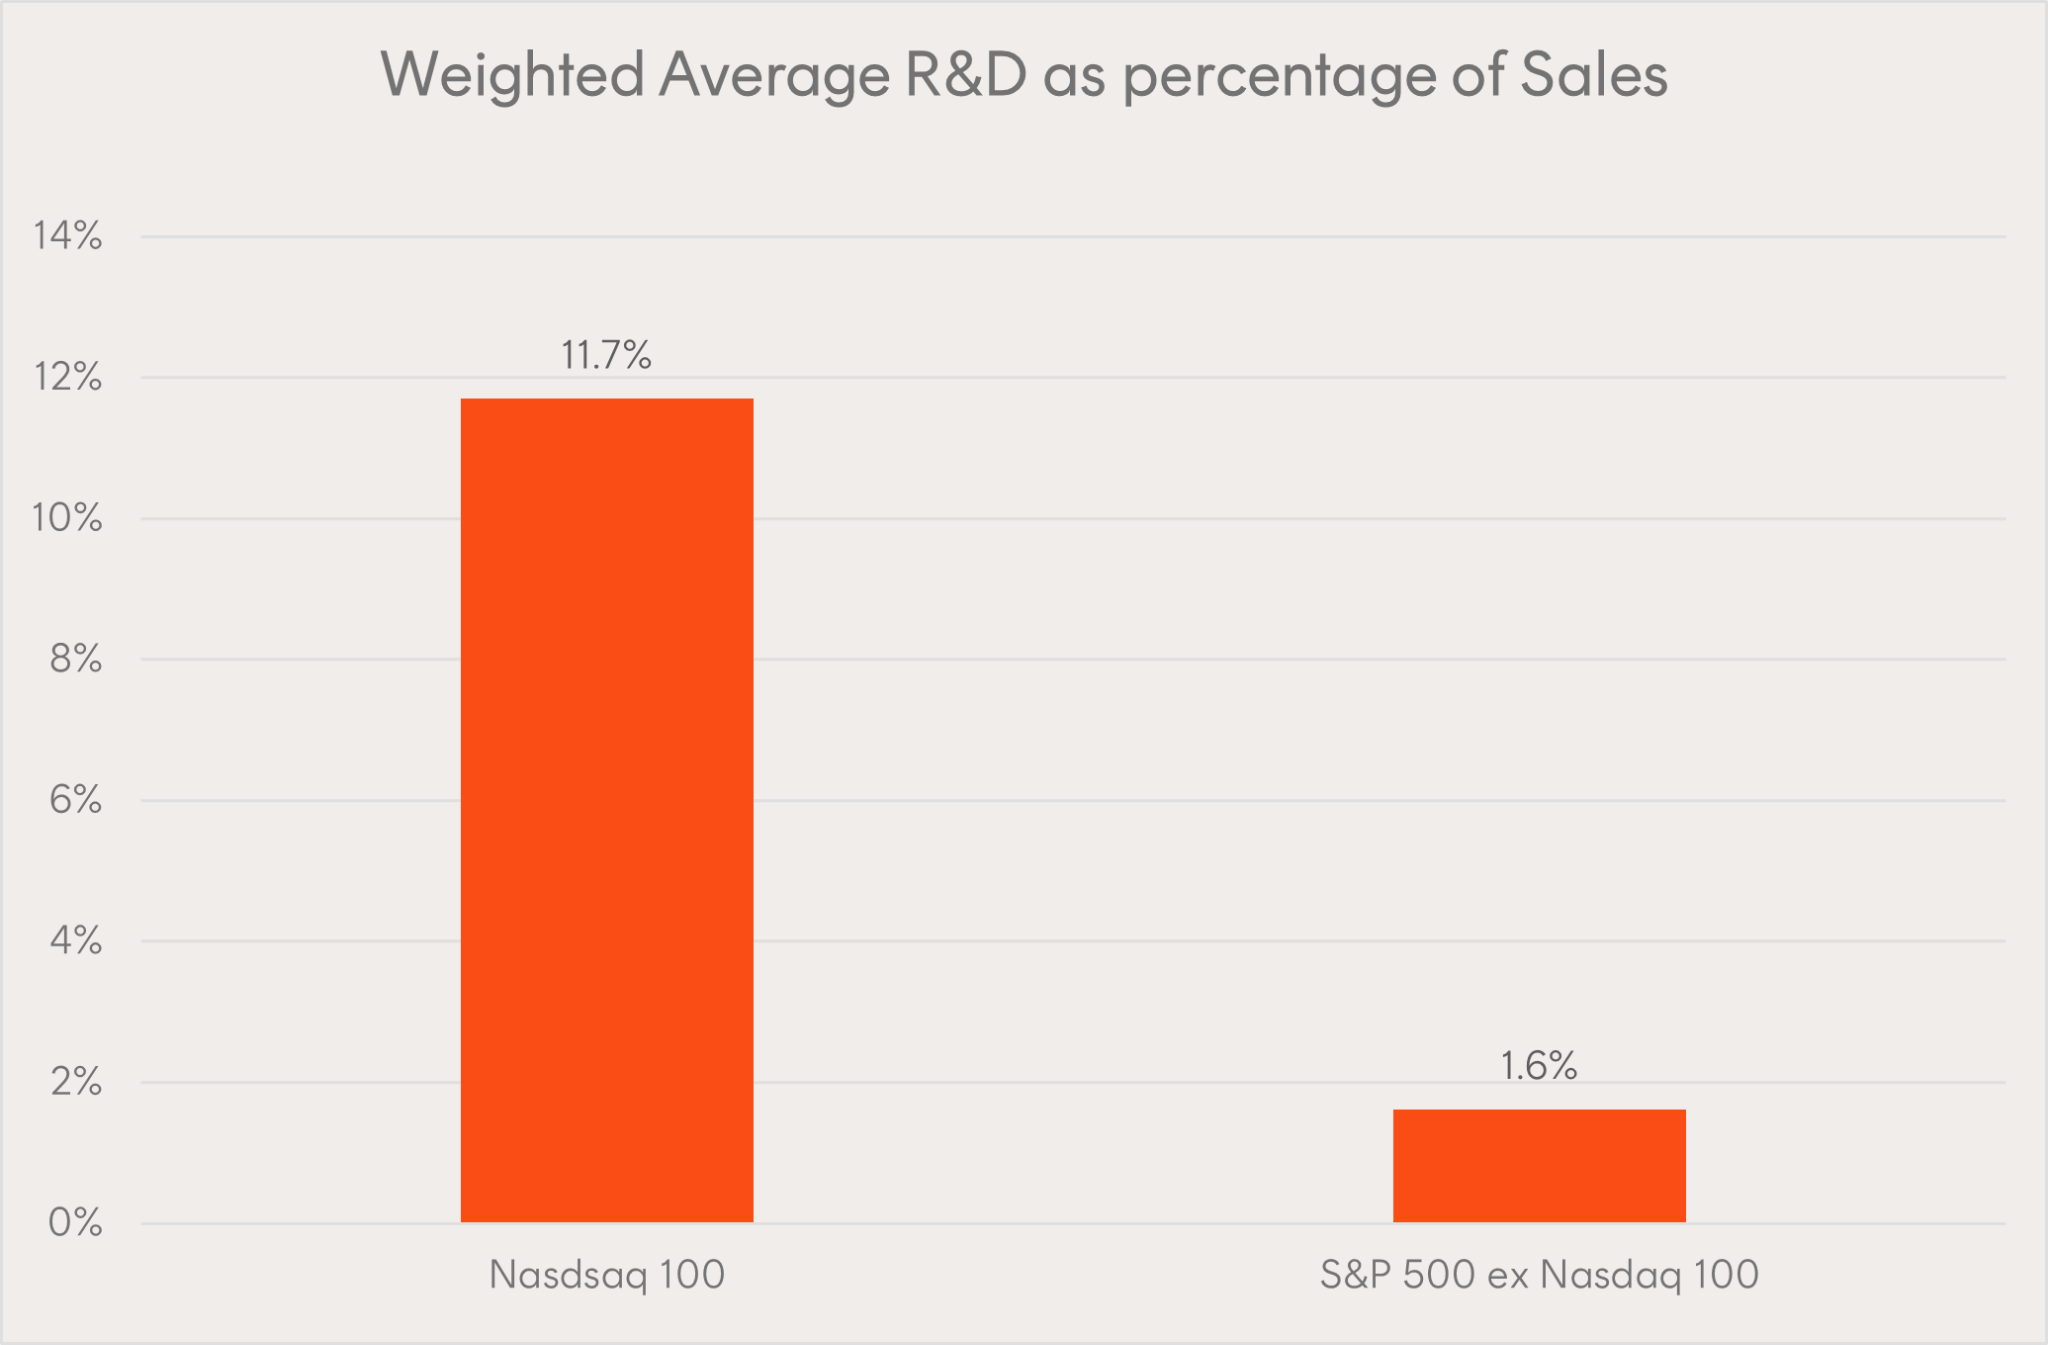 Source: Nasdaq Global Indexes, FactSet. Data as of 30 June 2023. Shows data for Nasdaq-100 companies and S&P 500 excluding Nasdaq-100 companies. S&P 500 weighted average R&D inclusive of Nasdaq-100 companies as a percentage of sales is 8.1%.